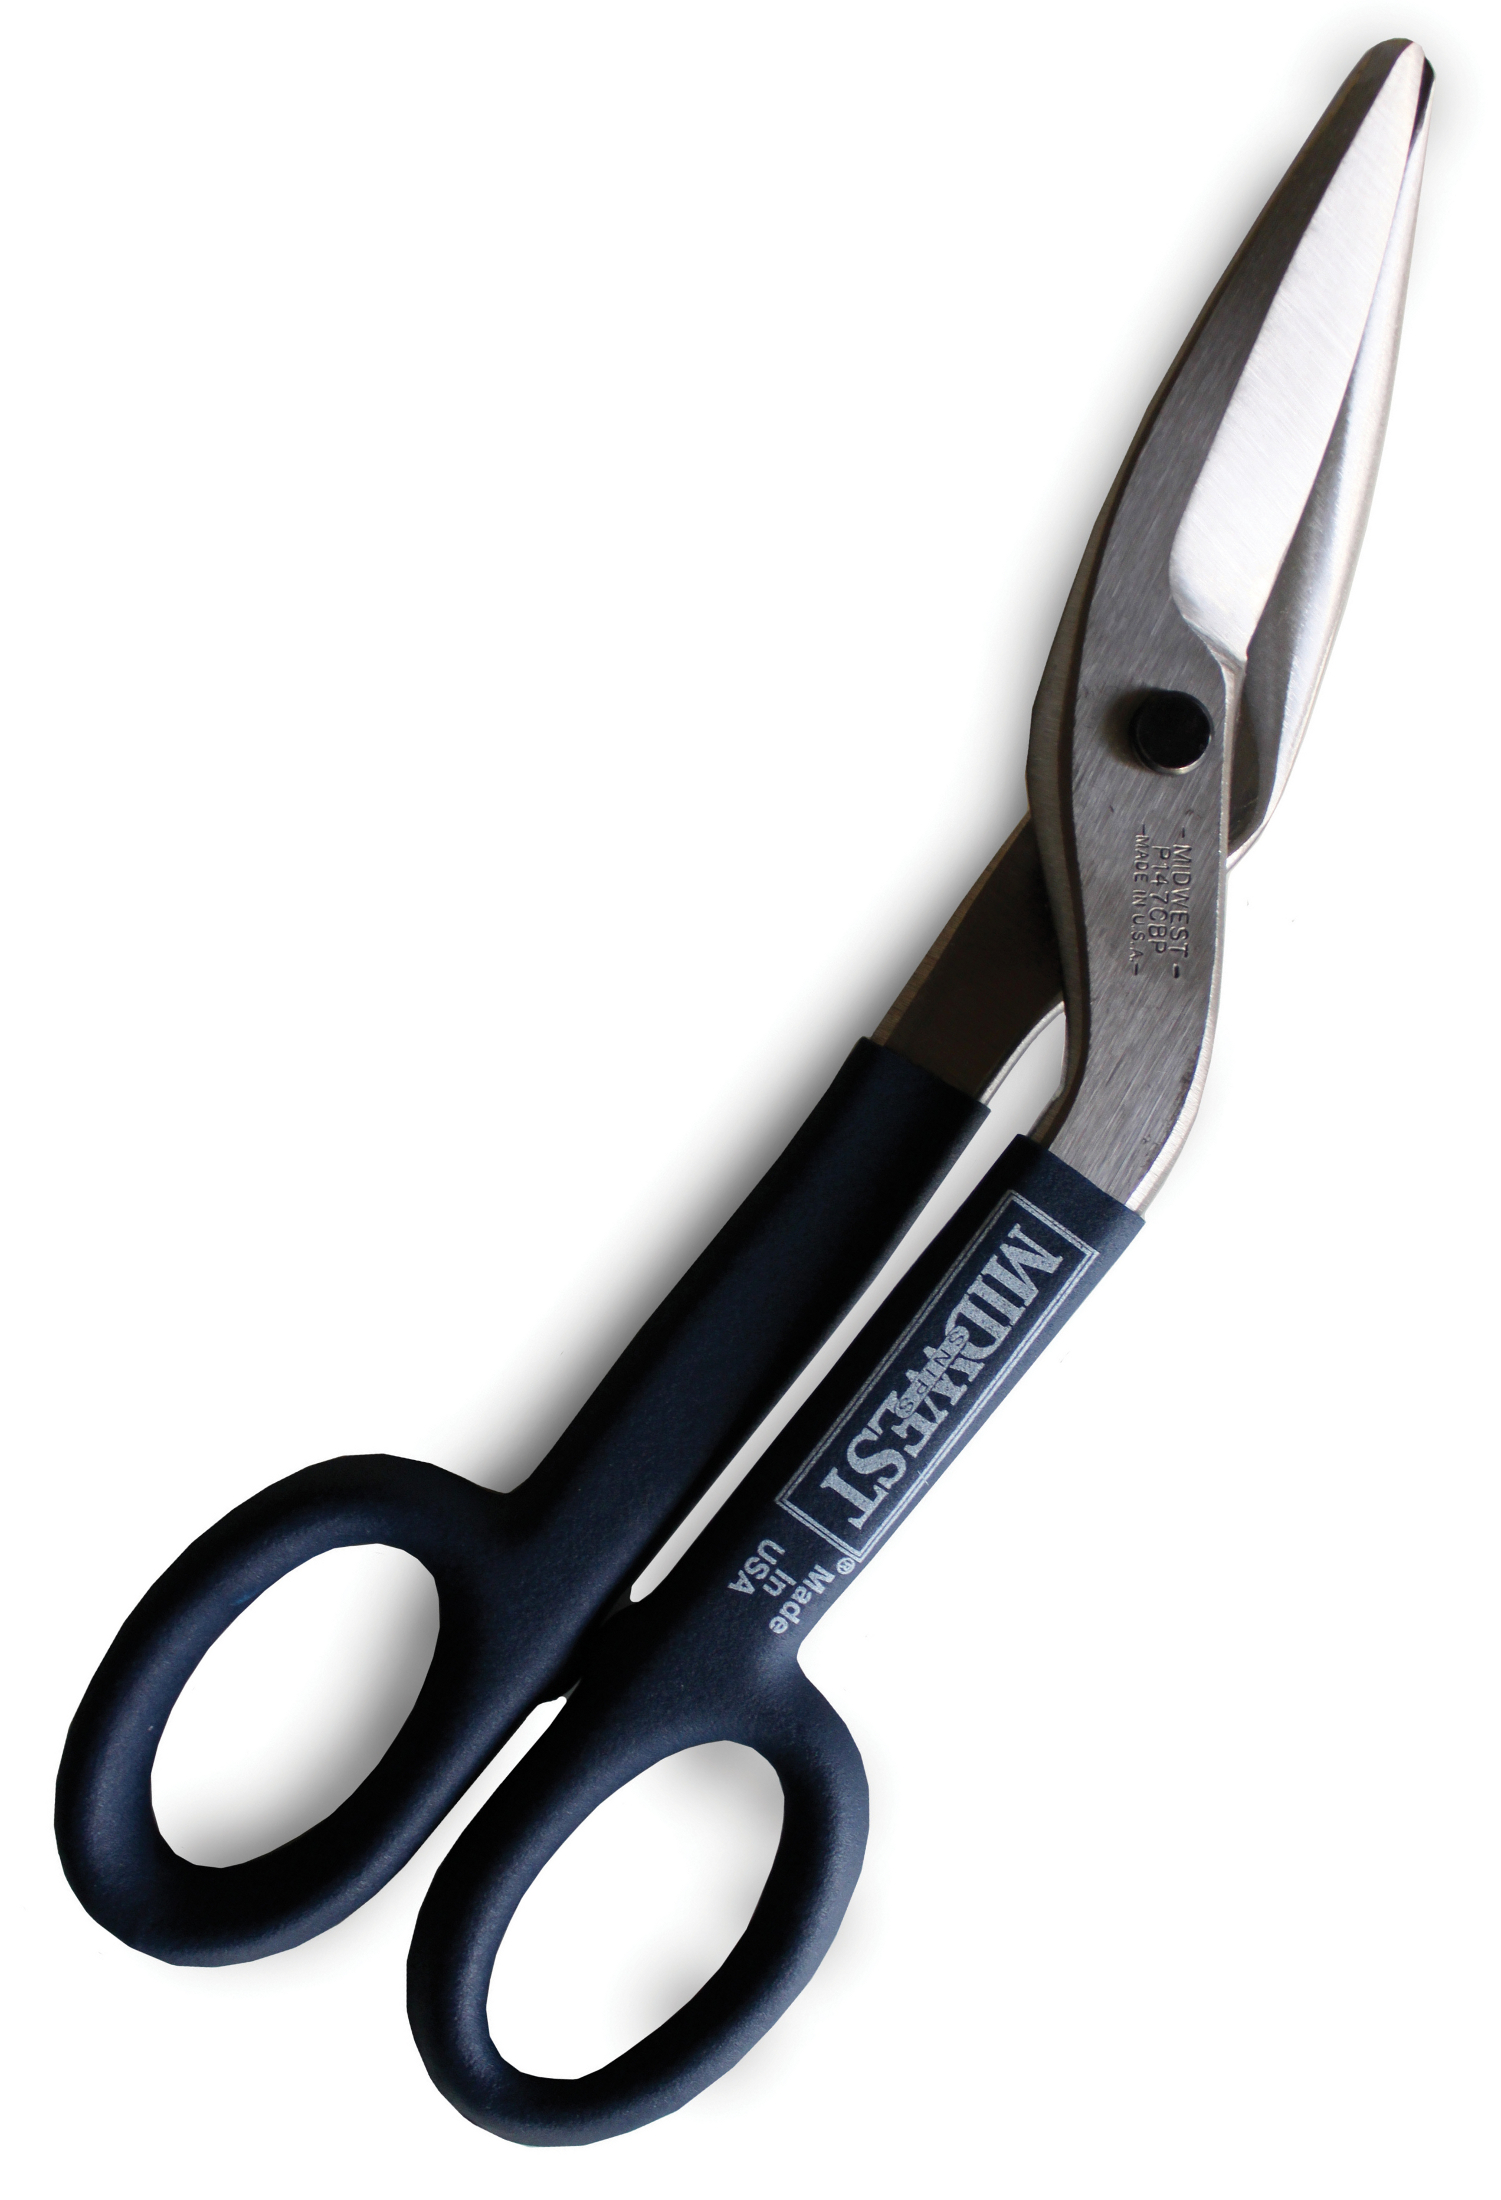 Andy Combination Snip for Vinyl and More! - Malco Products